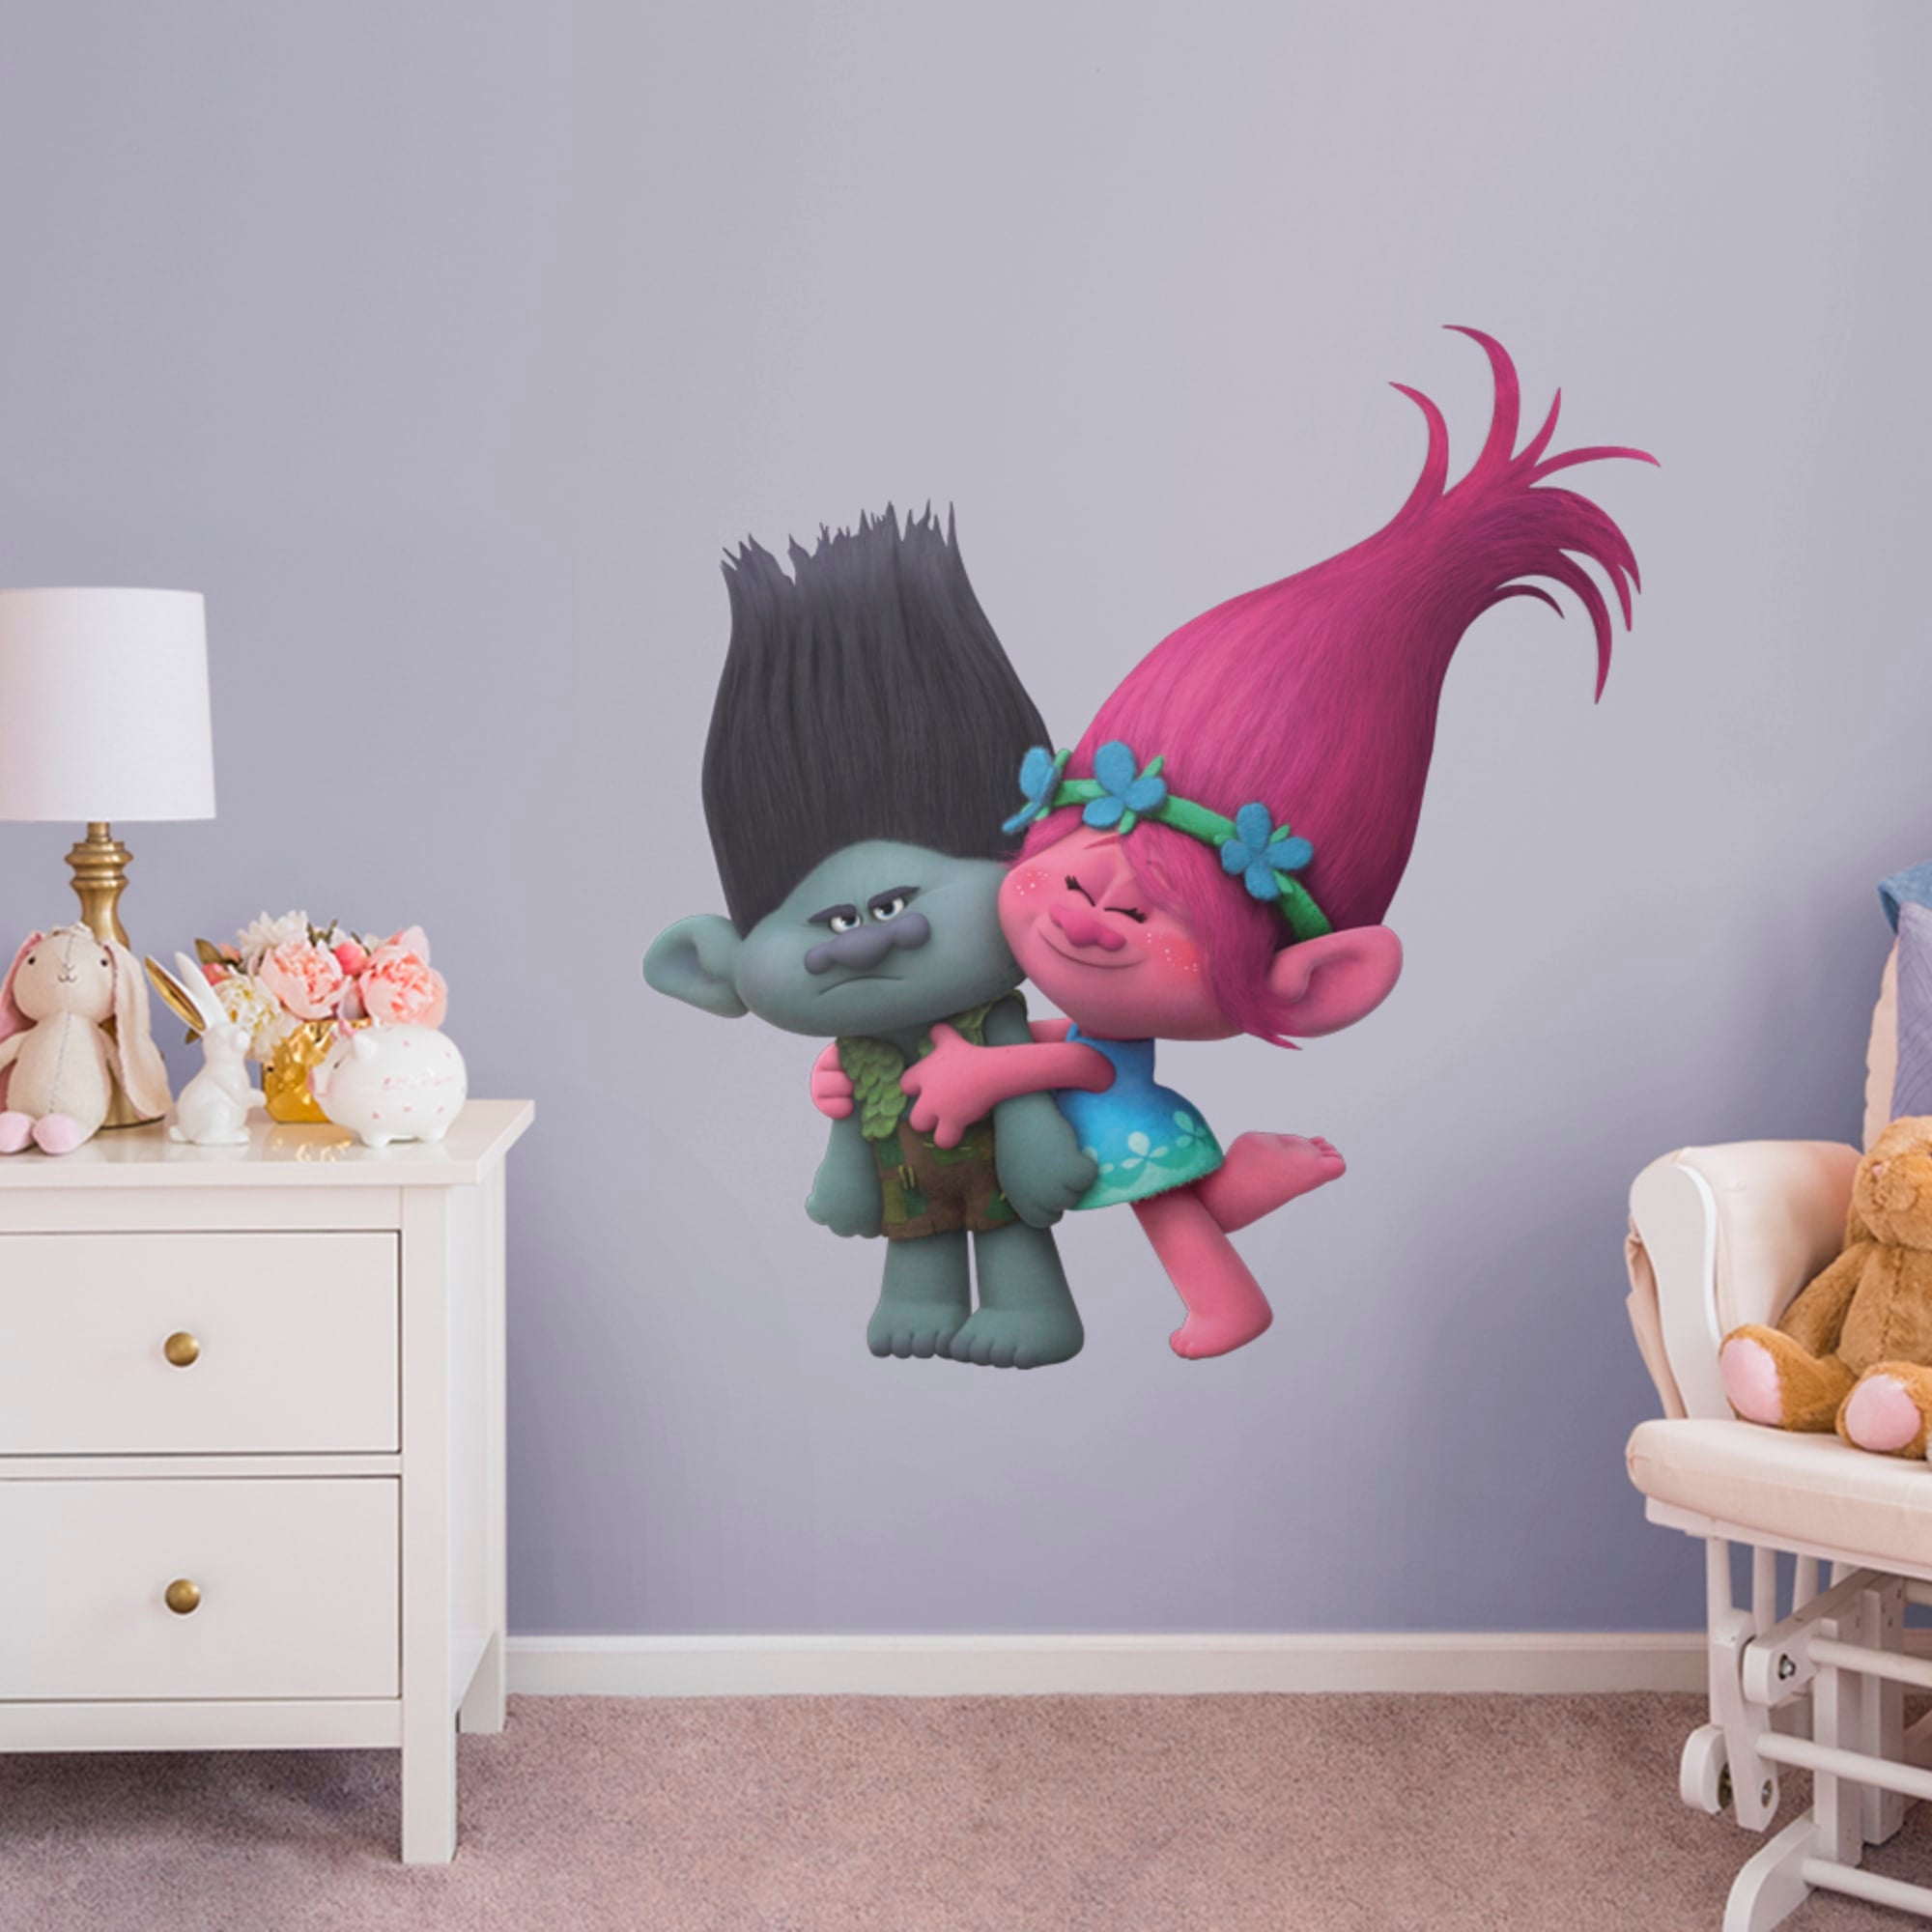 Poppy and Branch - Officially Licensed Trolls Removable Wall Decal Giant Character + 9 Decals (43"W x 44"H) by Fathead | Vinyl